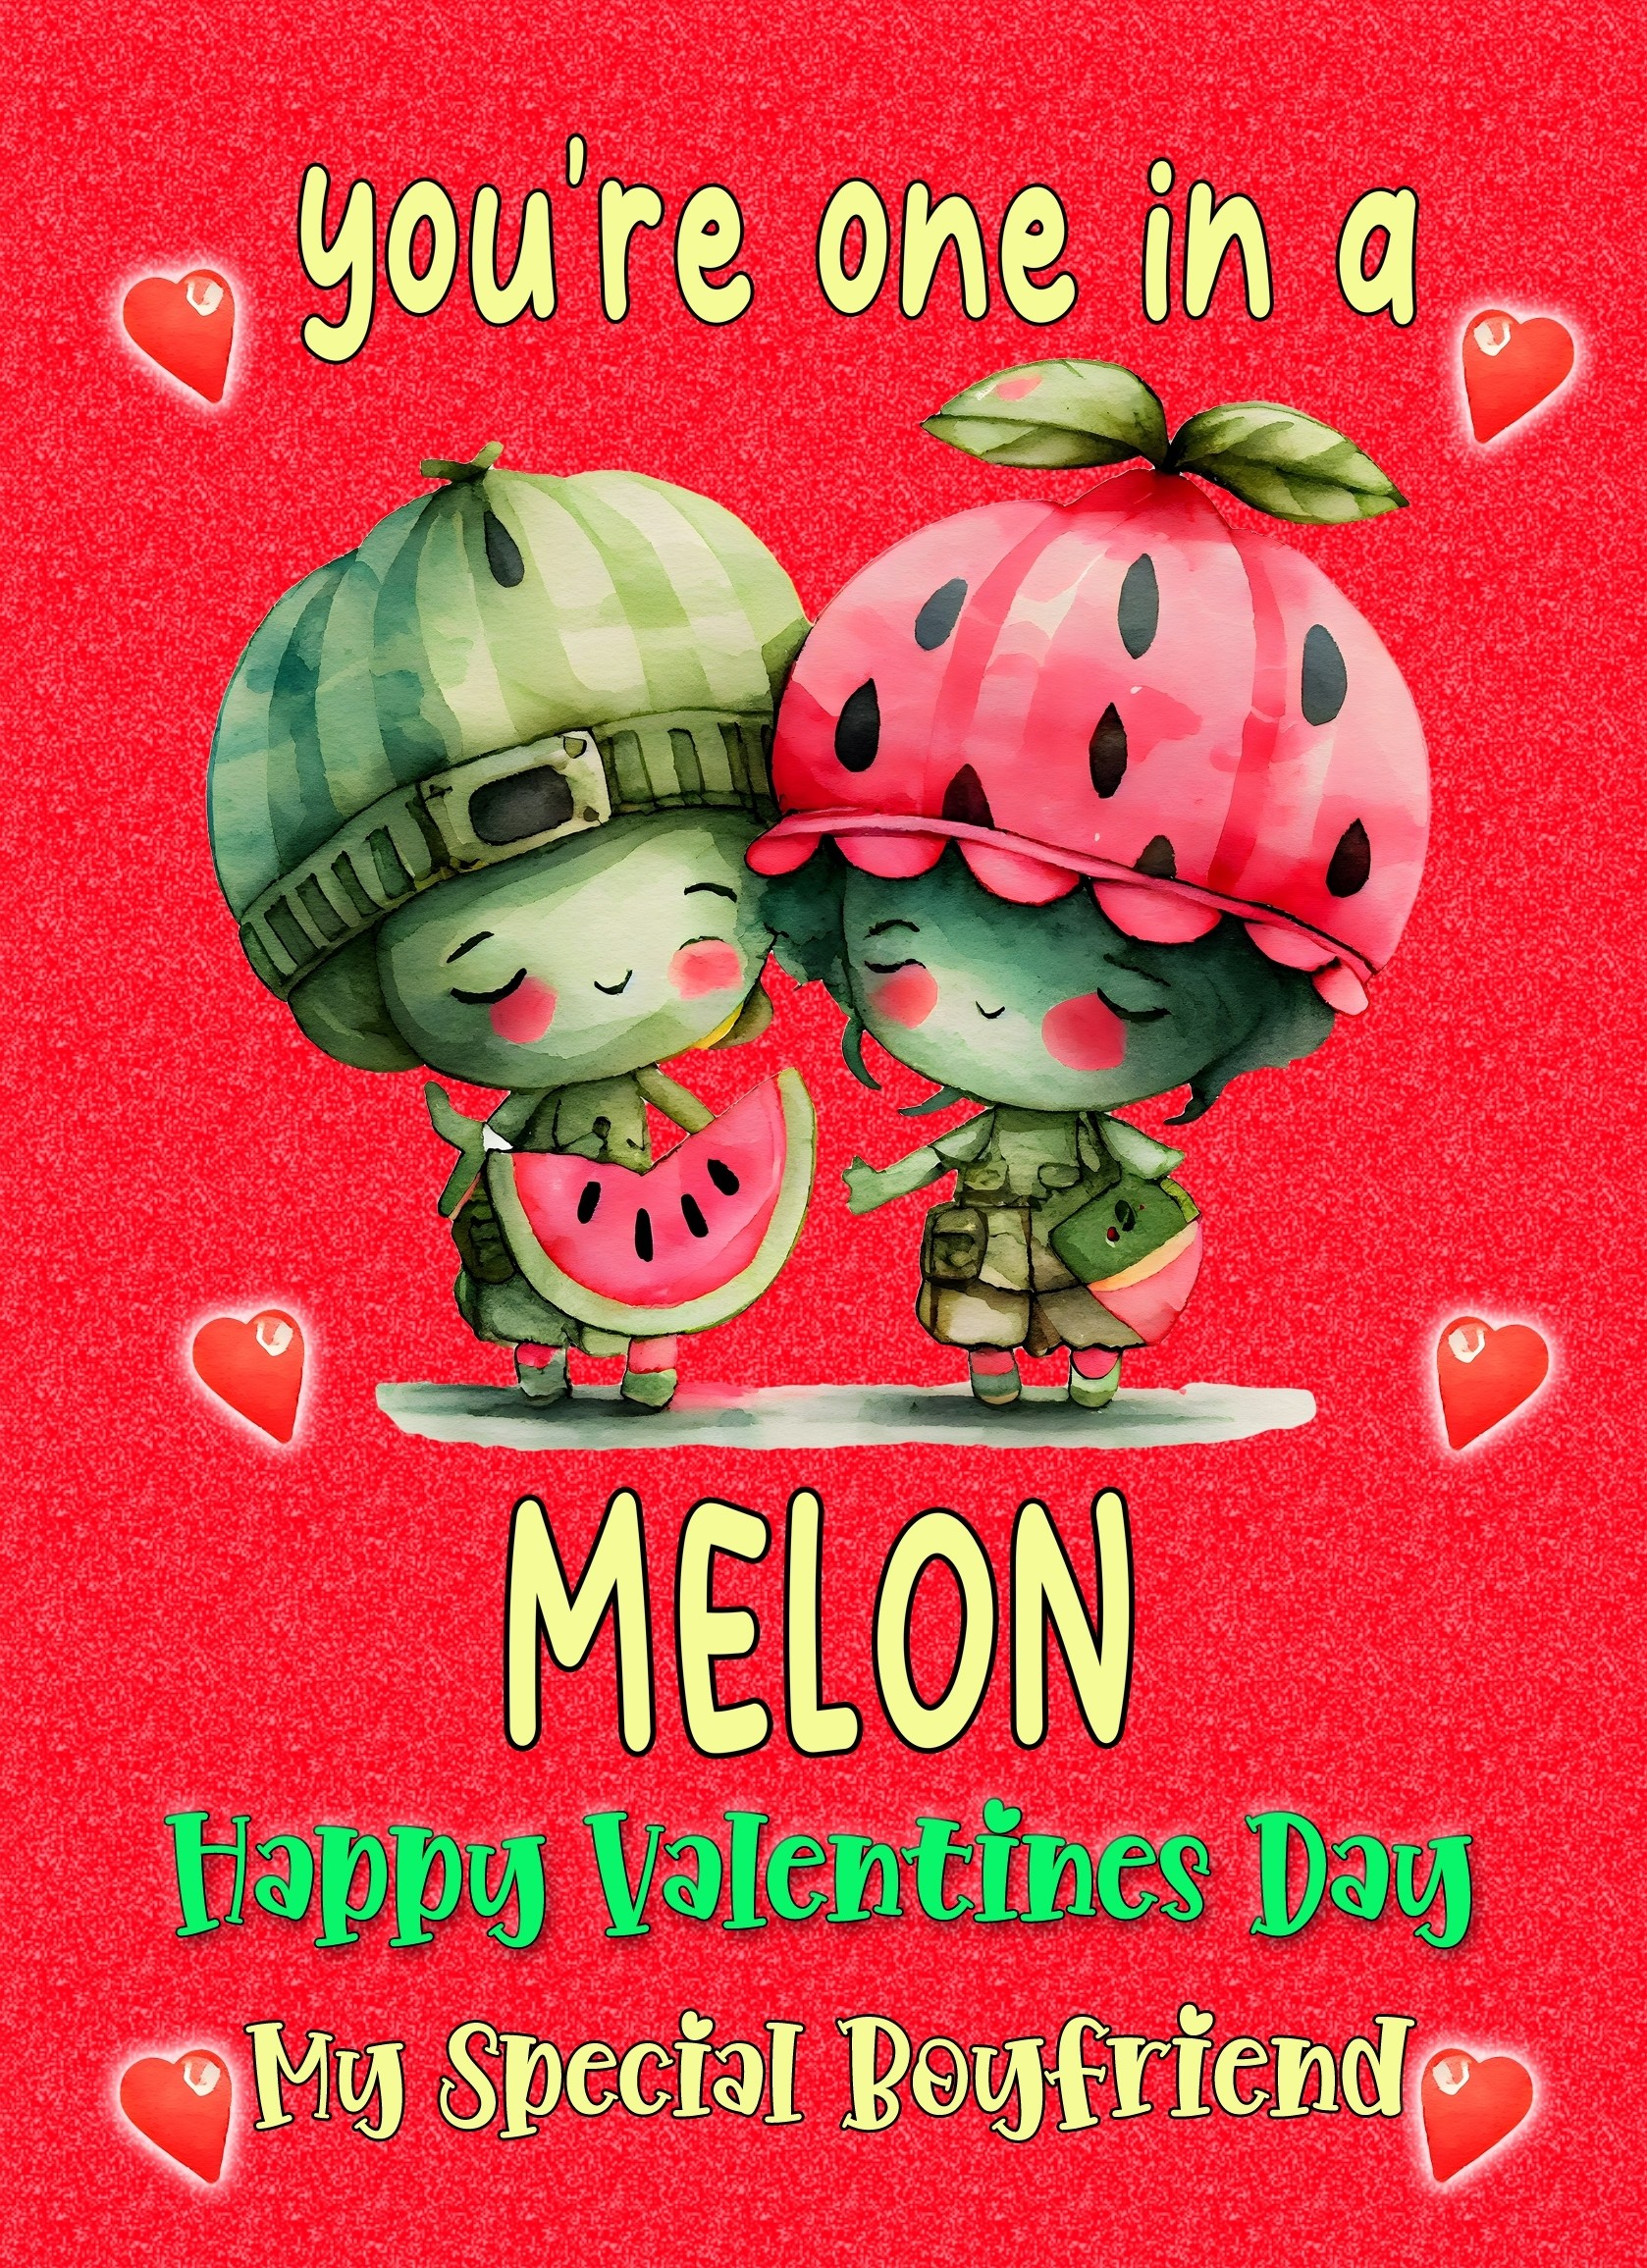 Funny Pun Valentines Day Card for Boyfriend (One in a Melon)